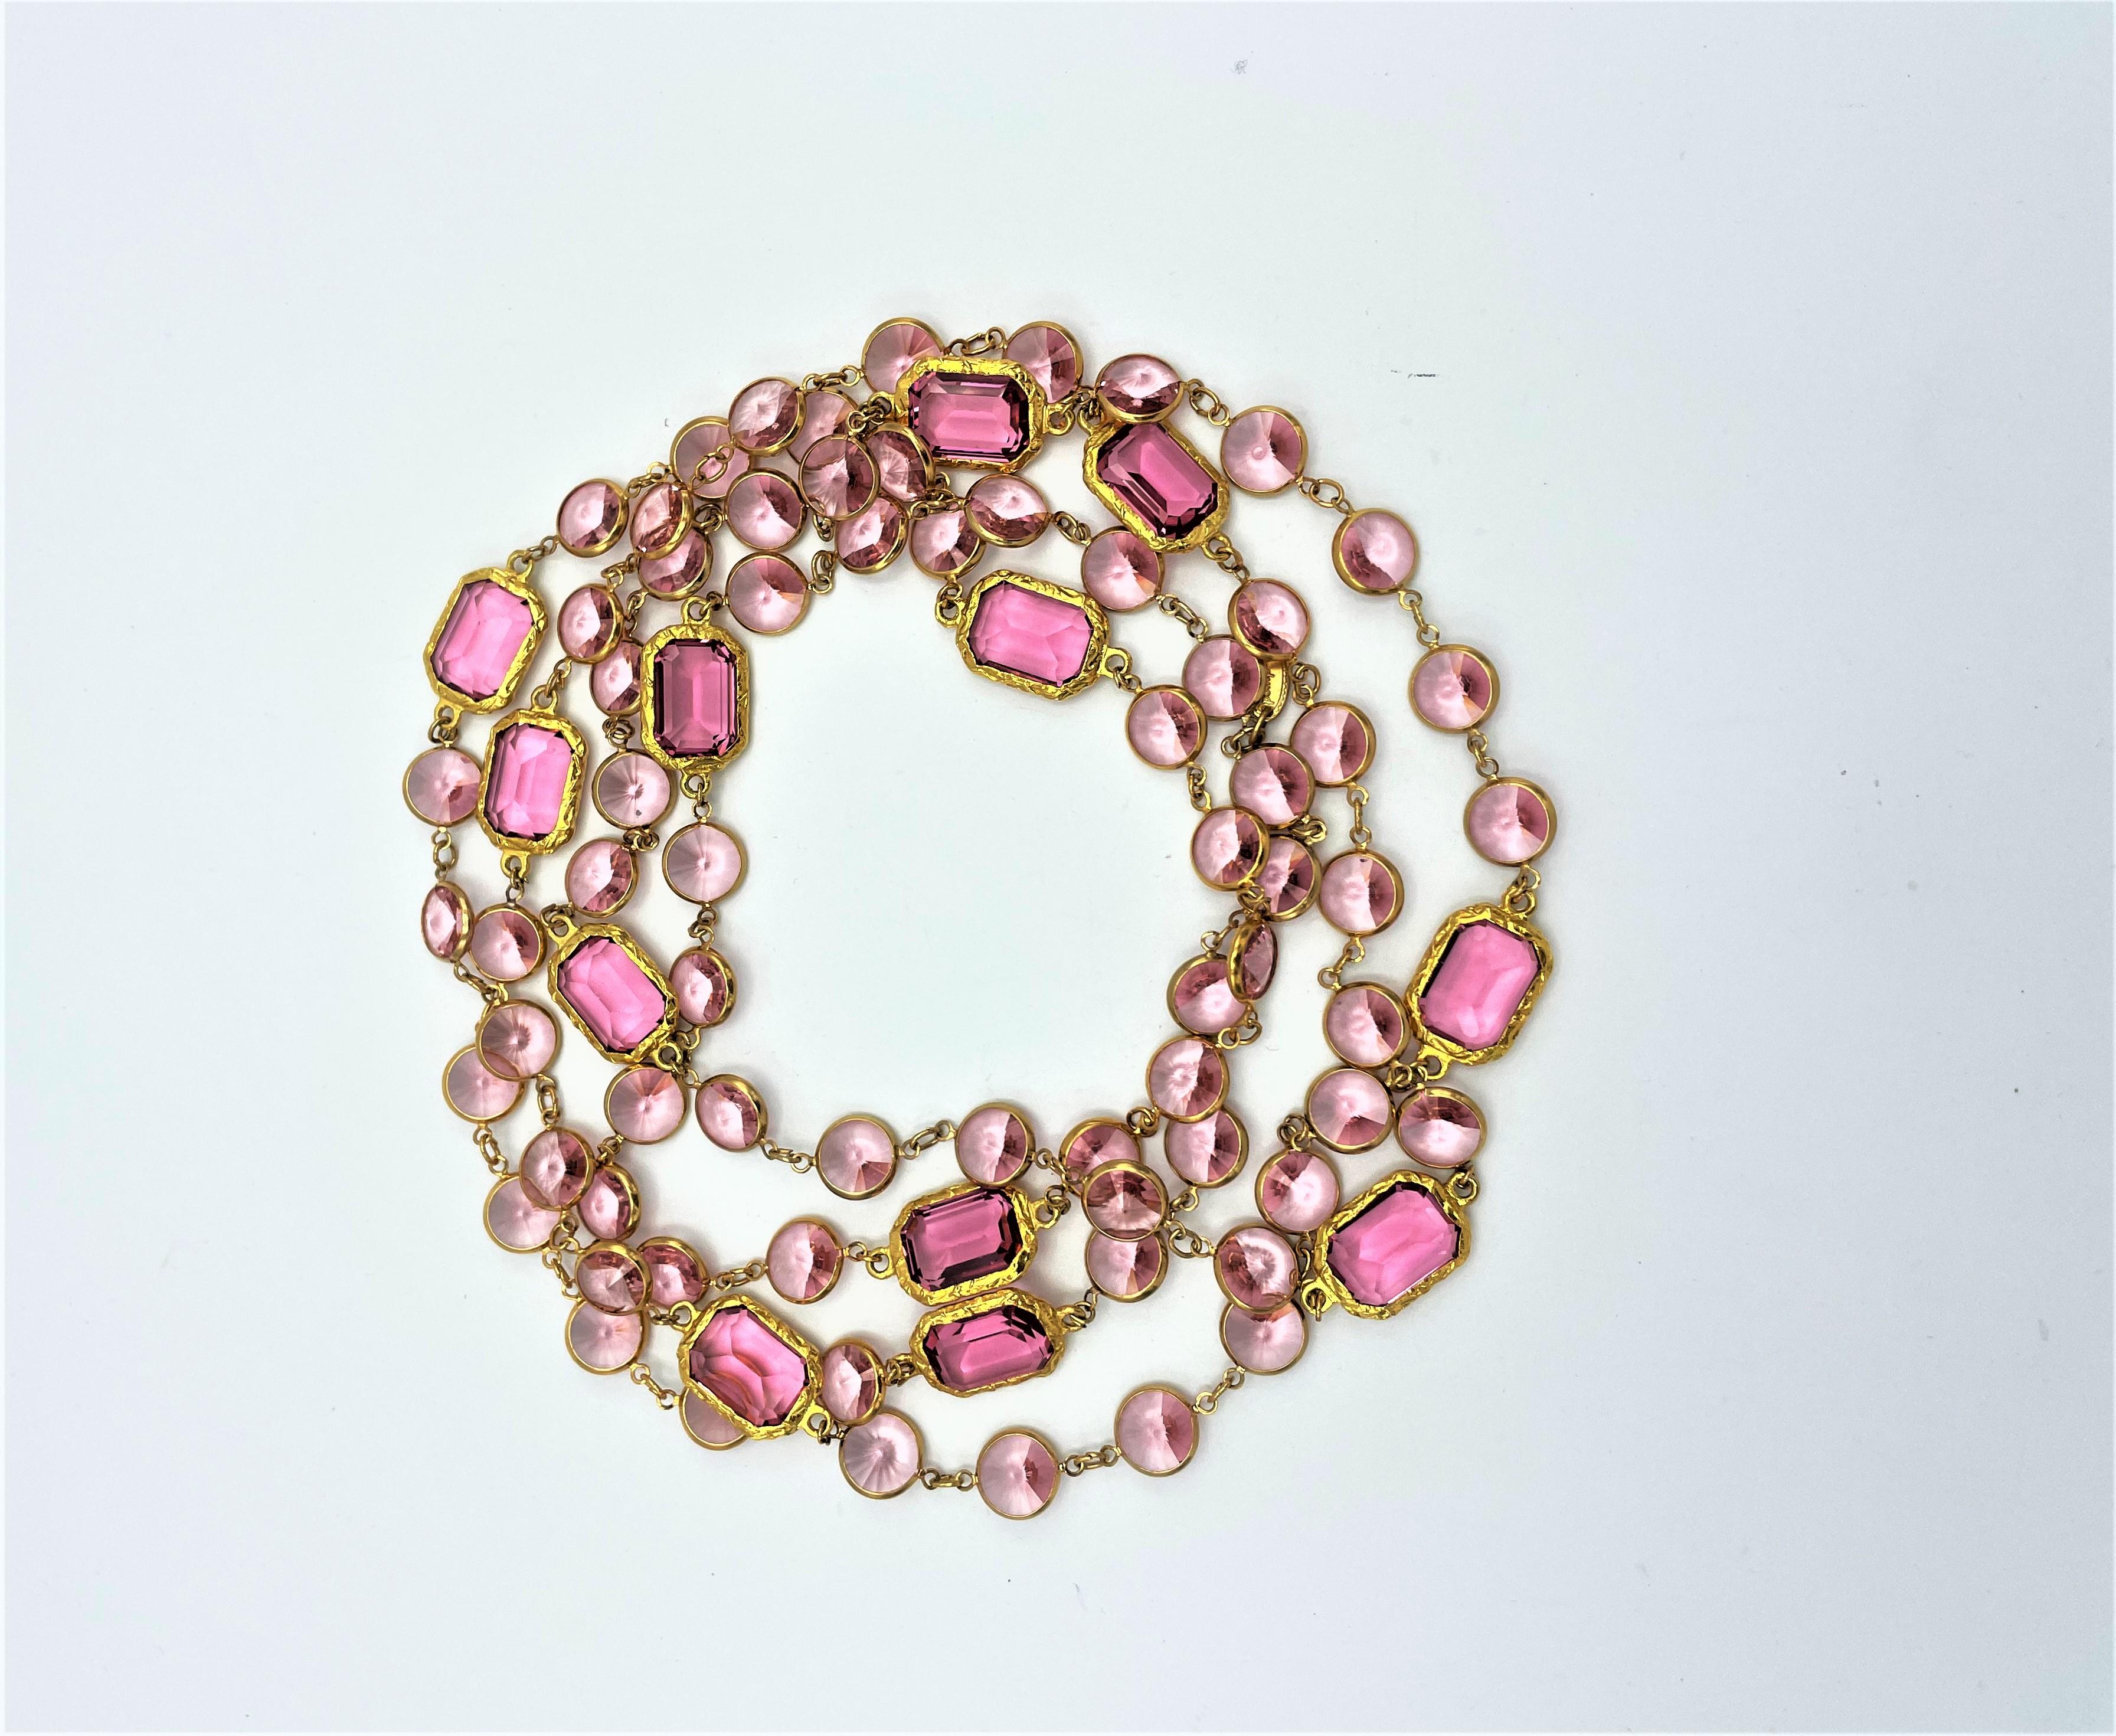 Women's  Necklace like the Chanel Chicklet, pink Swarovski crystals gold plated, new  